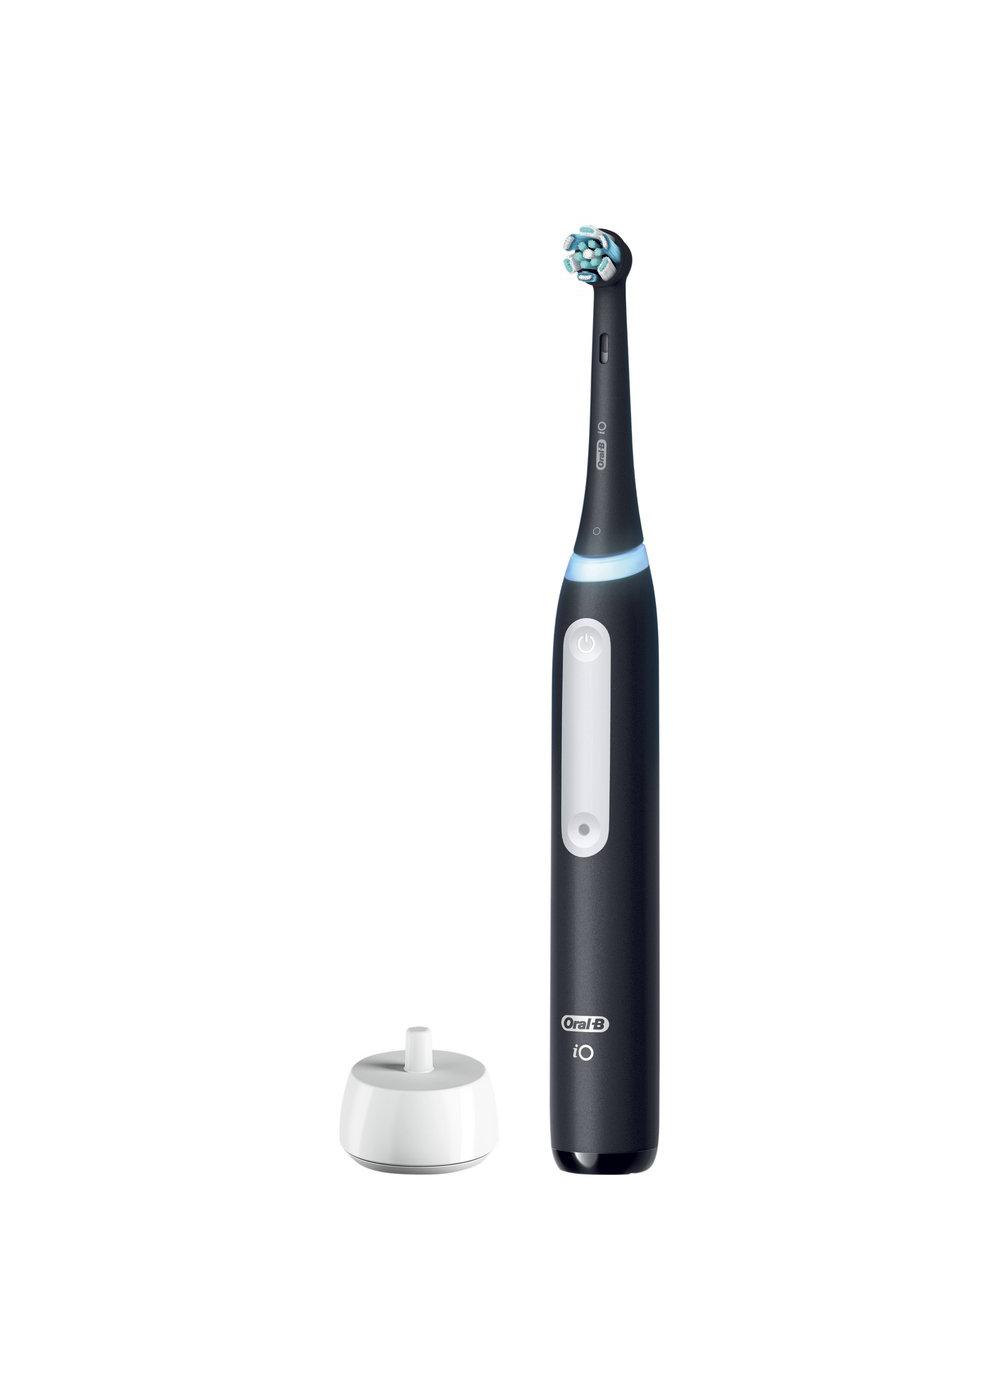 Oral-B iO Series 3 Rechargeable Toothbrush - Shop Toothbrushes at H-E-B